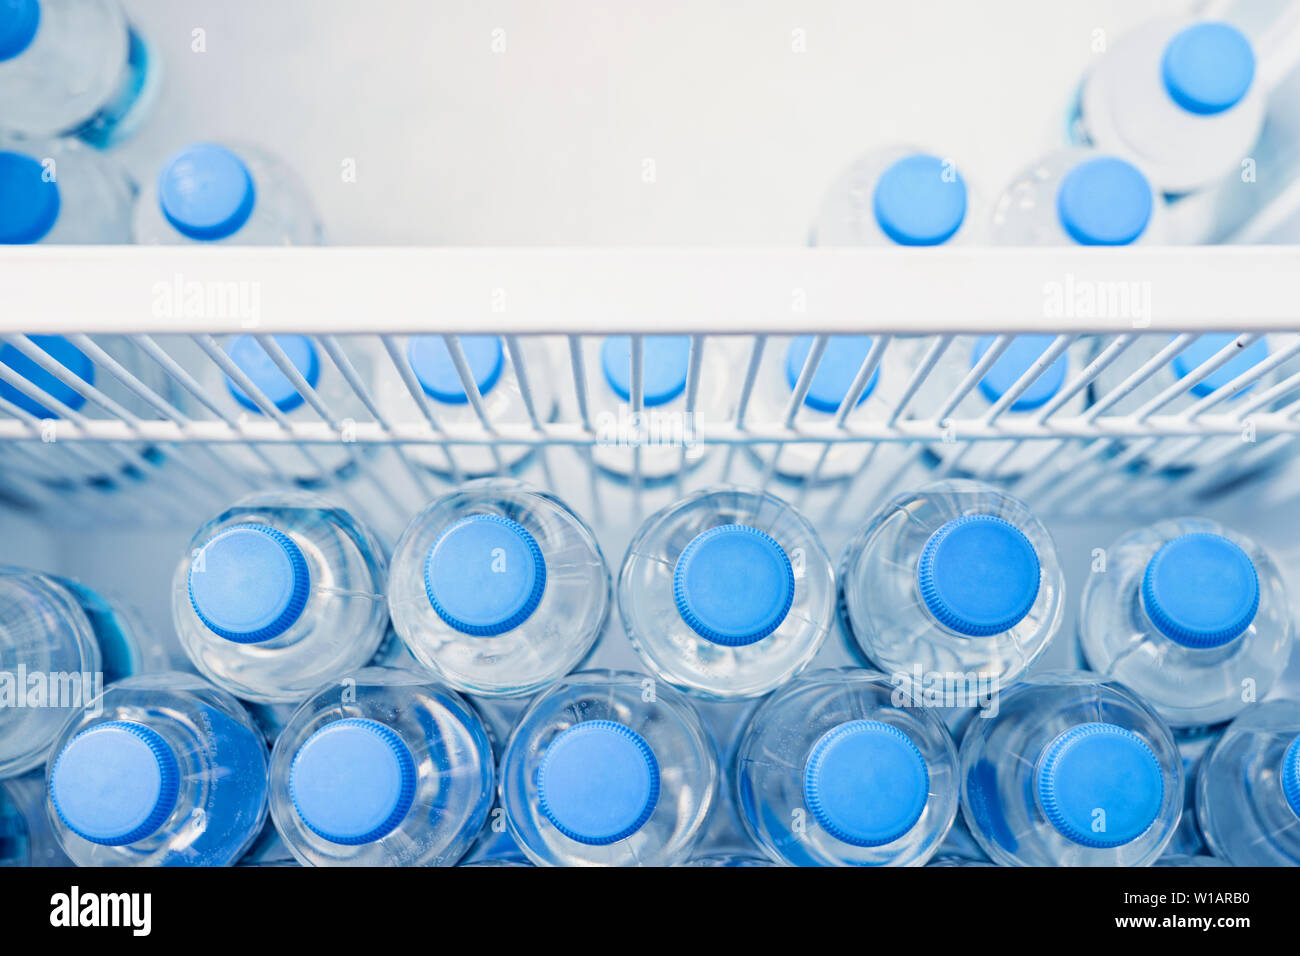 https://c8.alamy.com/comp/W1ARB0/rows-of-many-transparent-plastic-bottles-with-drinking-water-supply-in-white-refrigerator-mineral-water-stack-storage-in-fridge-to-drink-on-hot-W1ARB0.jpg